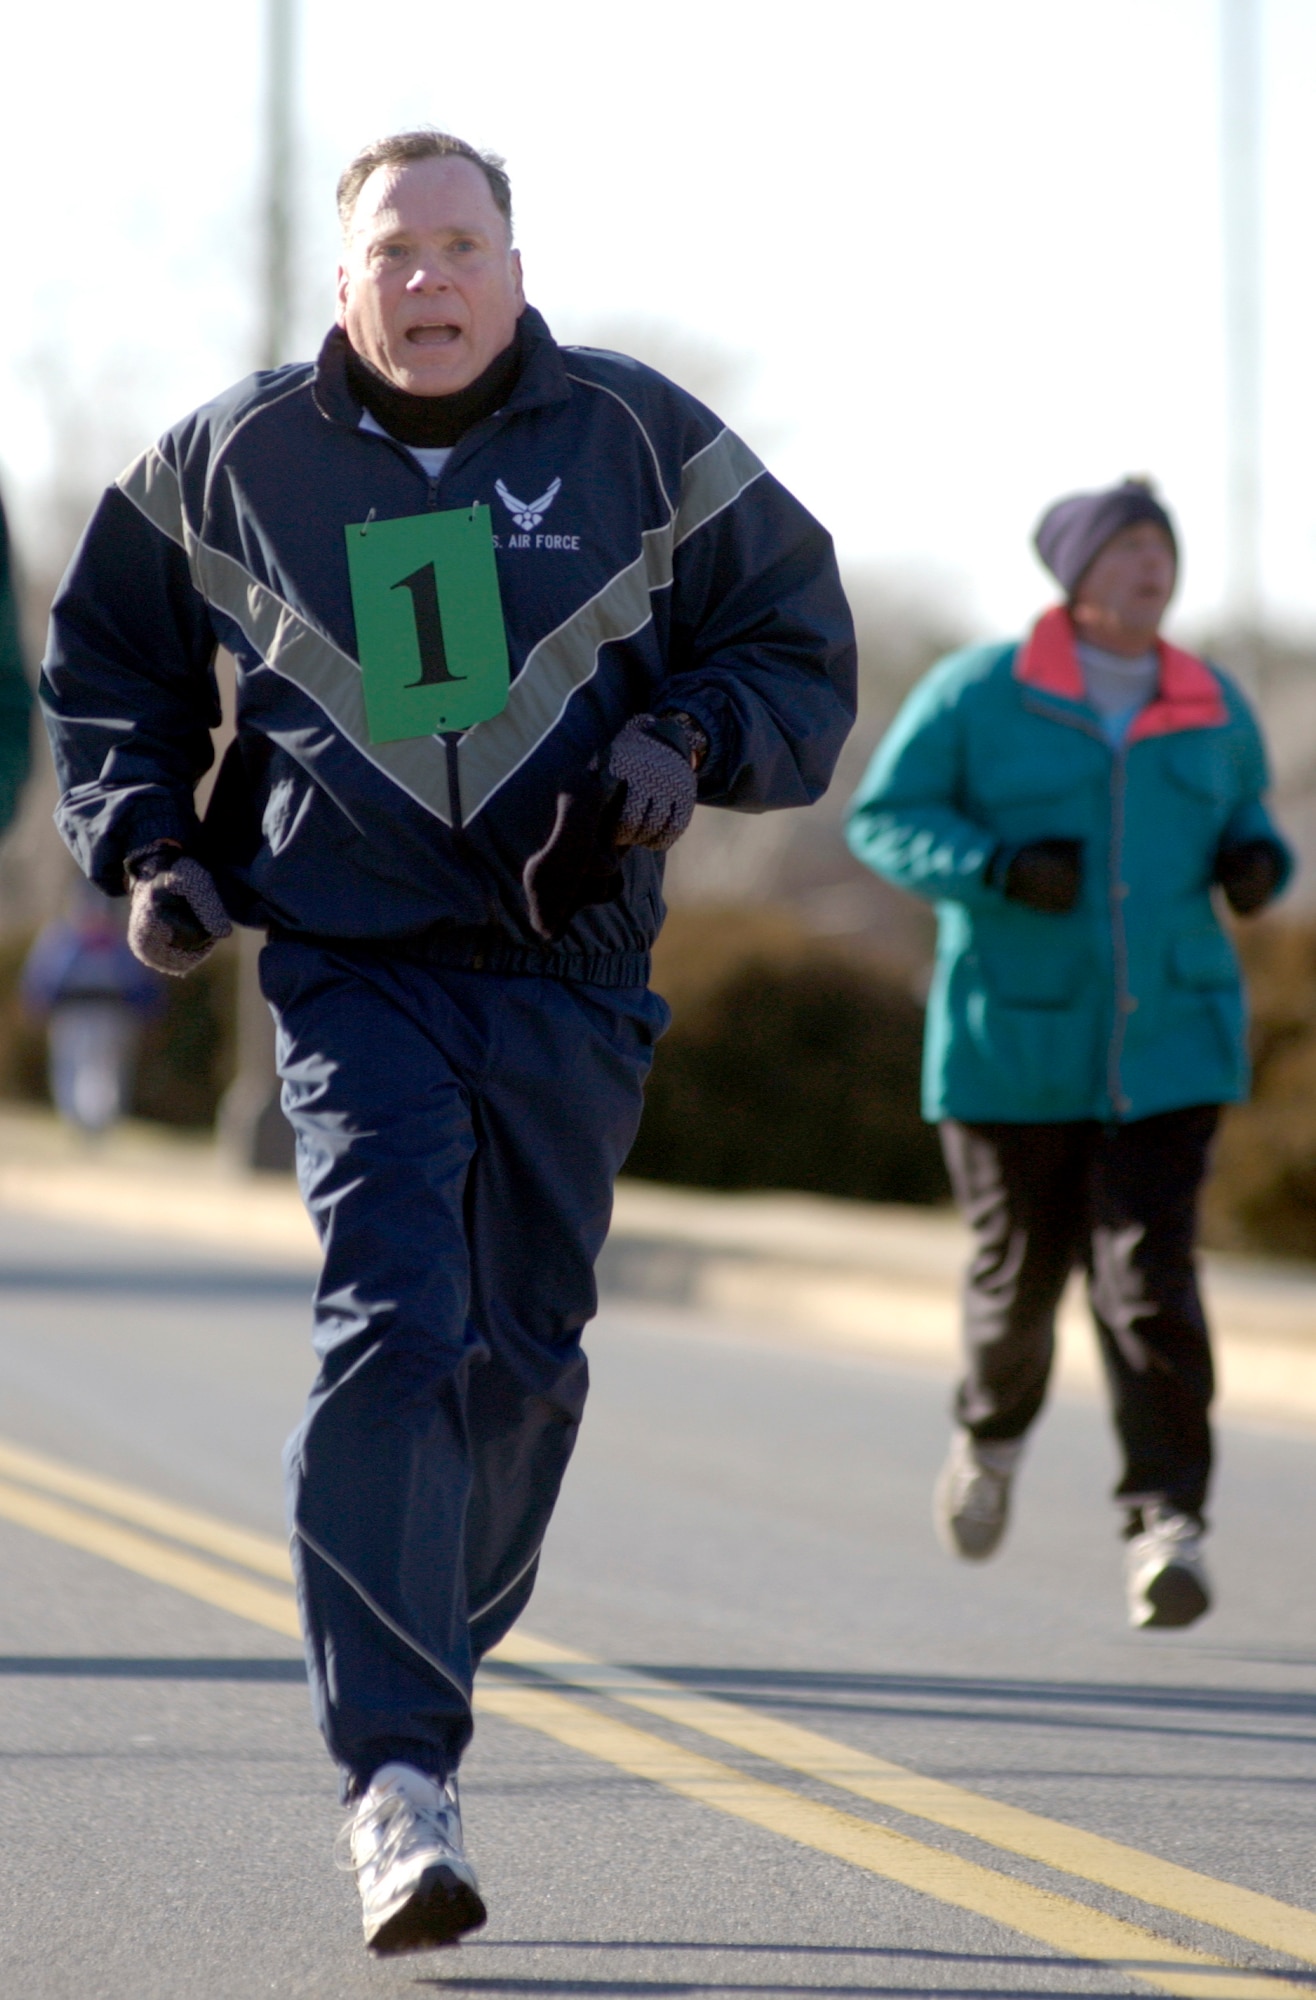 BOLLING AIR FORCE BASE, D.C. (AFPN) -- Air Force Chief of Staff Gen. John P. Jumper finishes the 1.5-mile run for his fitness evaluation Jan. 7.  Nearly 60 general officers from throughout the National Capitol Region braved bitter cold weather to join General Jumper as he led the way in officially launching the new Air Force fitness standard.  (U.S. Air Force photo by Master Sgt. Jim Varhegyi)